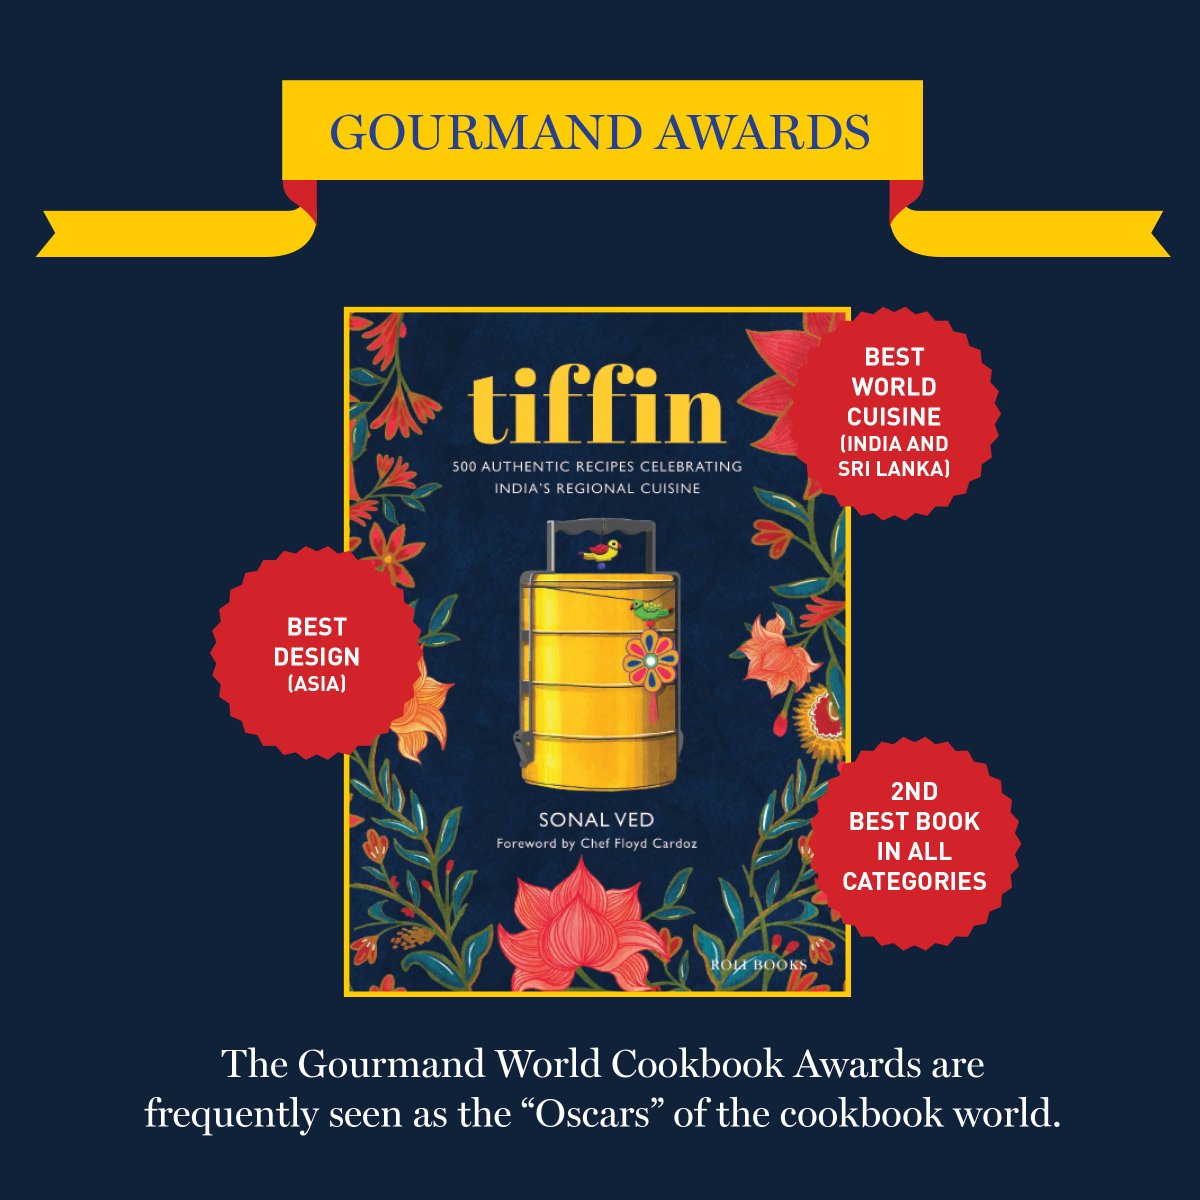 Indian cookbooks strike it rich at Gourmand Awards